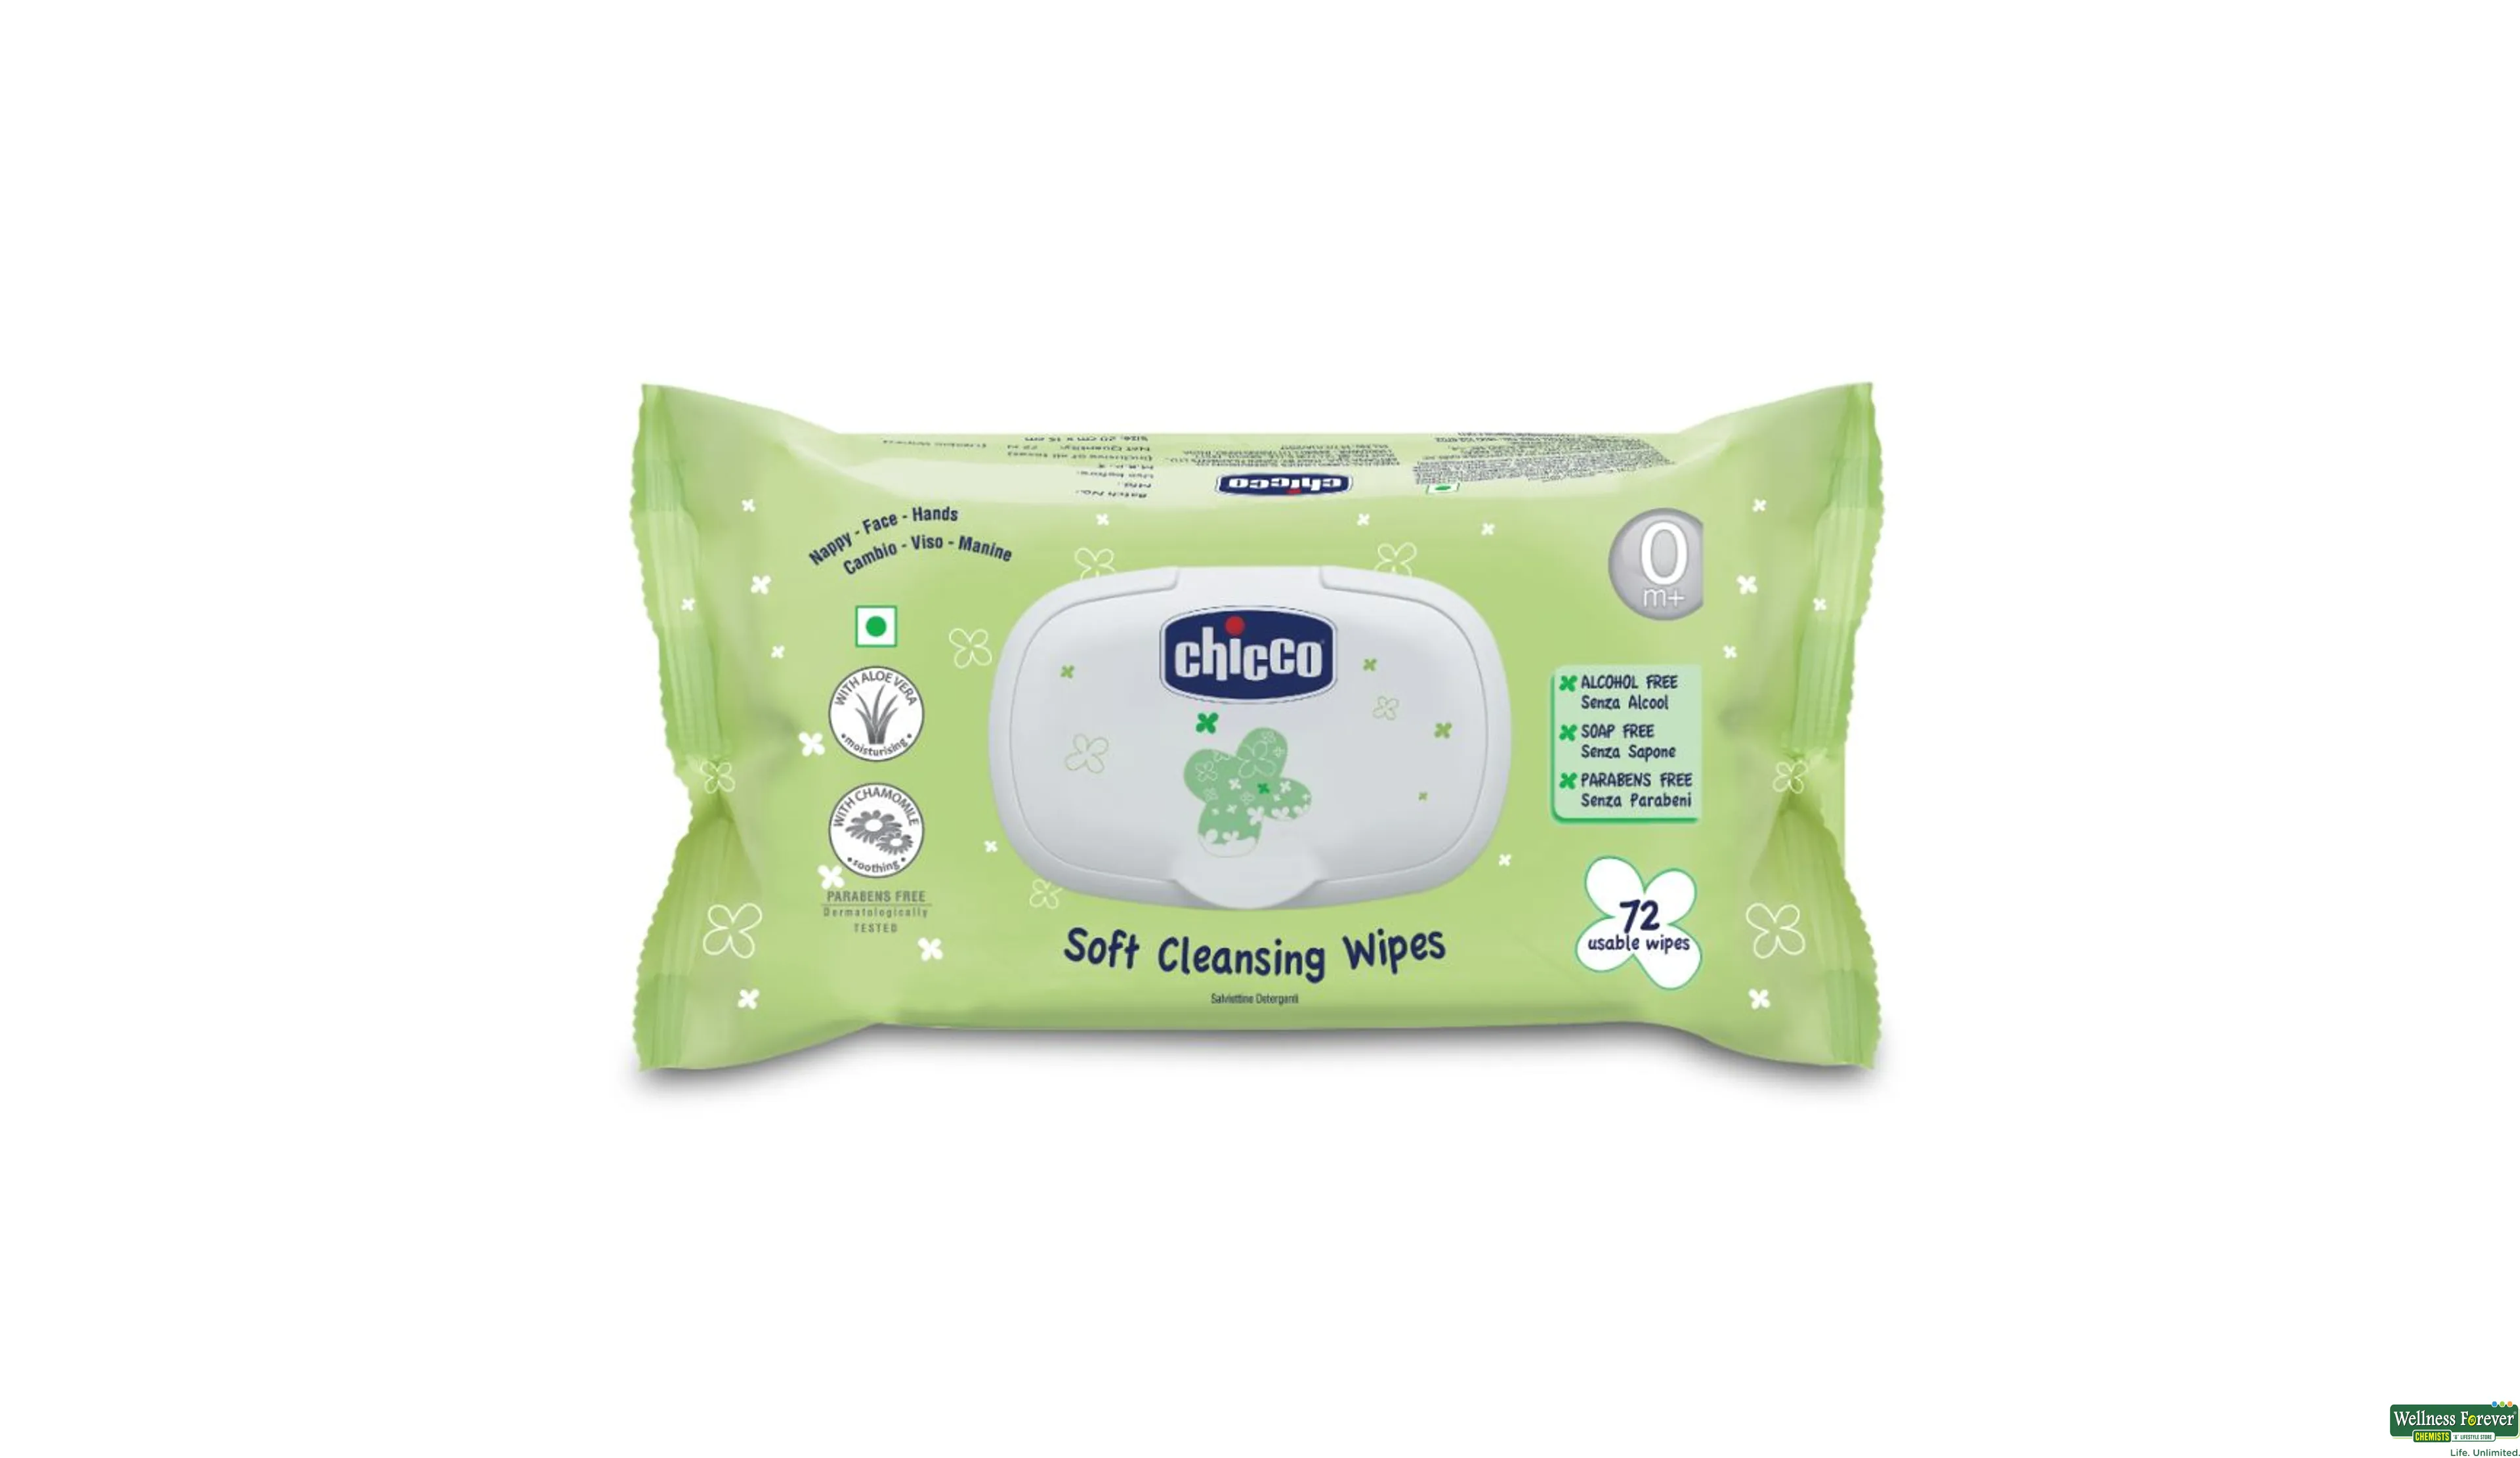 CHICCO BABY WIPES WITH FLIP 72PC- 1, 72PC, 